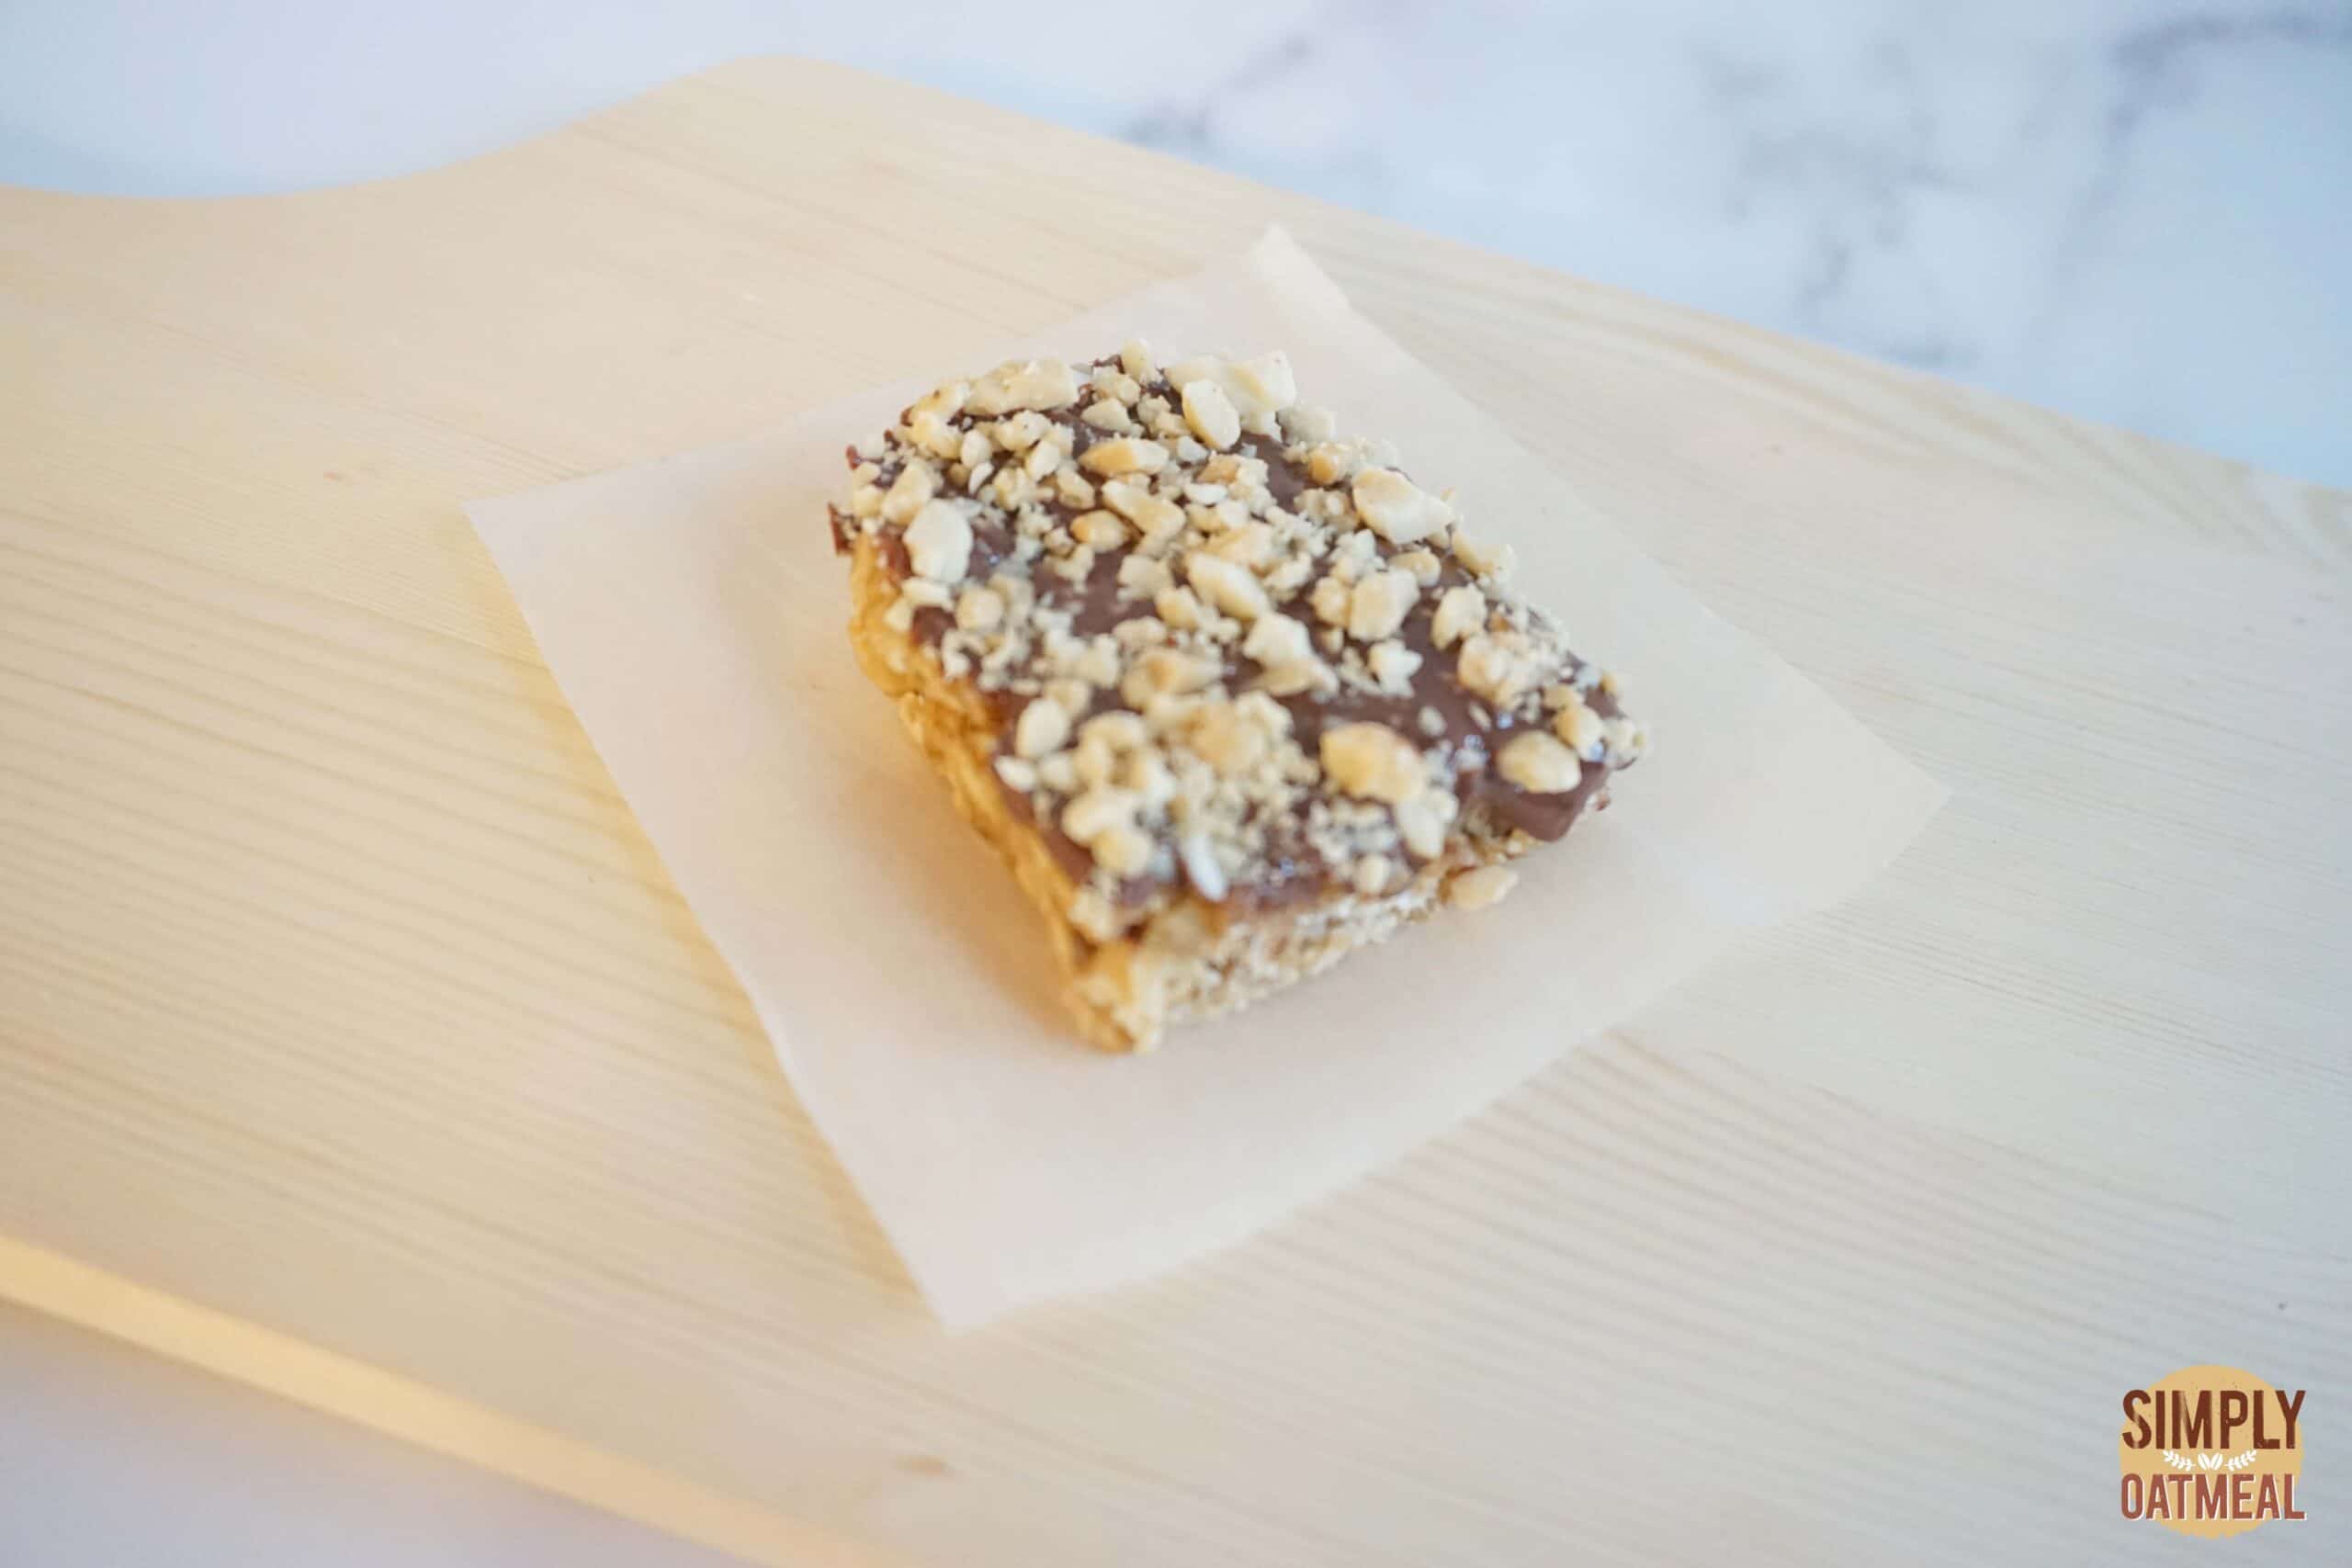 A single no bake chocolate peanut butter fudge oatmeal bar on a piece of parchment paper